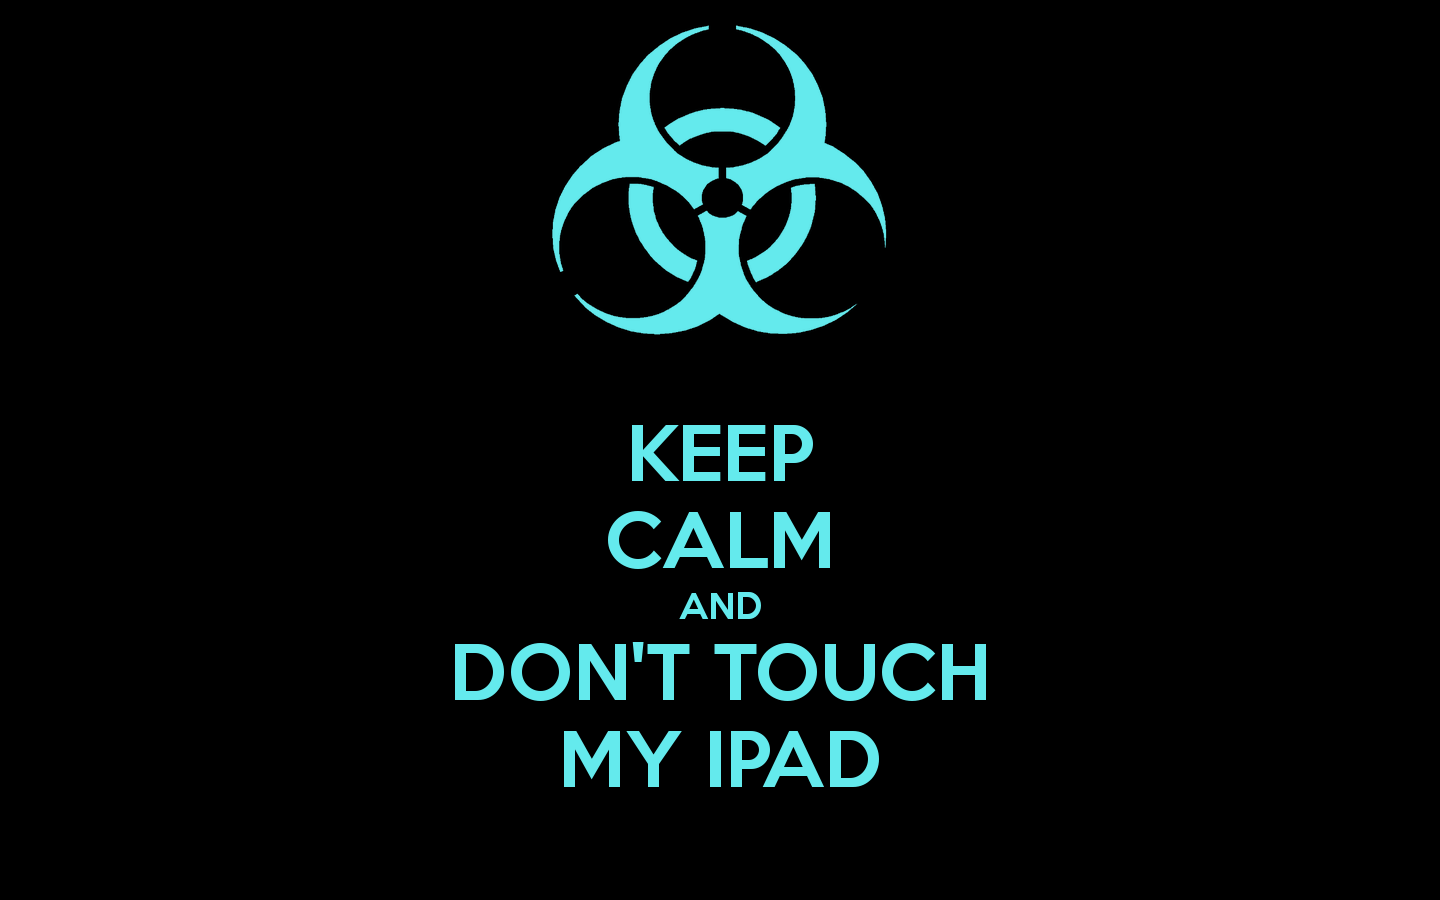 Обои don't Touch. Don't Touch my Phone обои. Обои don't Touch my IPAD. Фото don't Touch my Phone. Don t touch 2